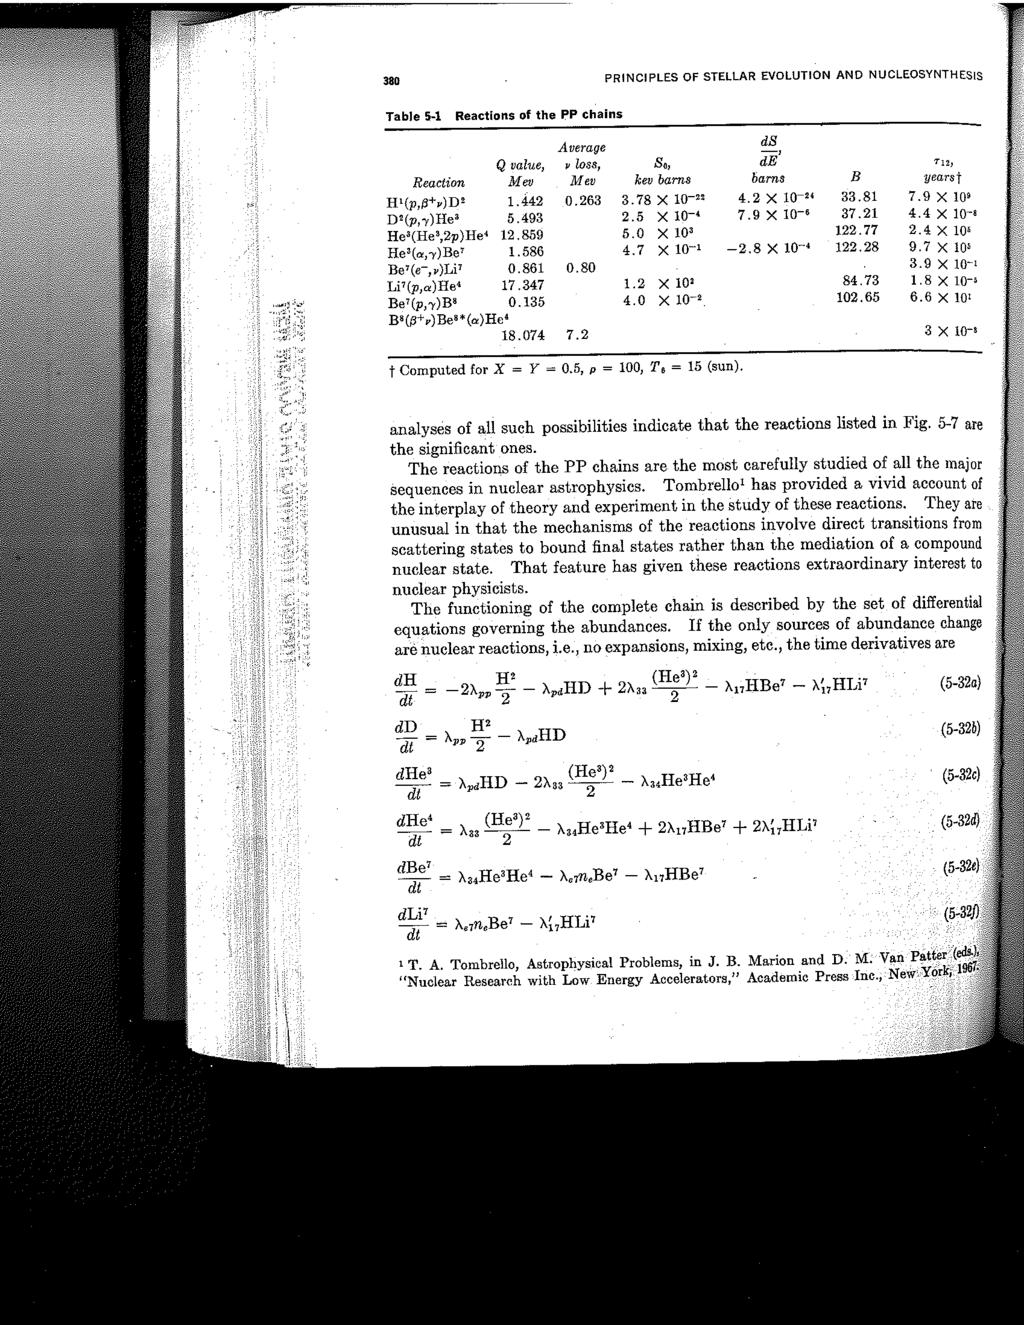 16 UNIT 1. ENERGY GENERATION Figure 1.3: The properties of the relevant chains of the proton-proton reaction. From Clayton [1983]. Let s be redundant, and clear.